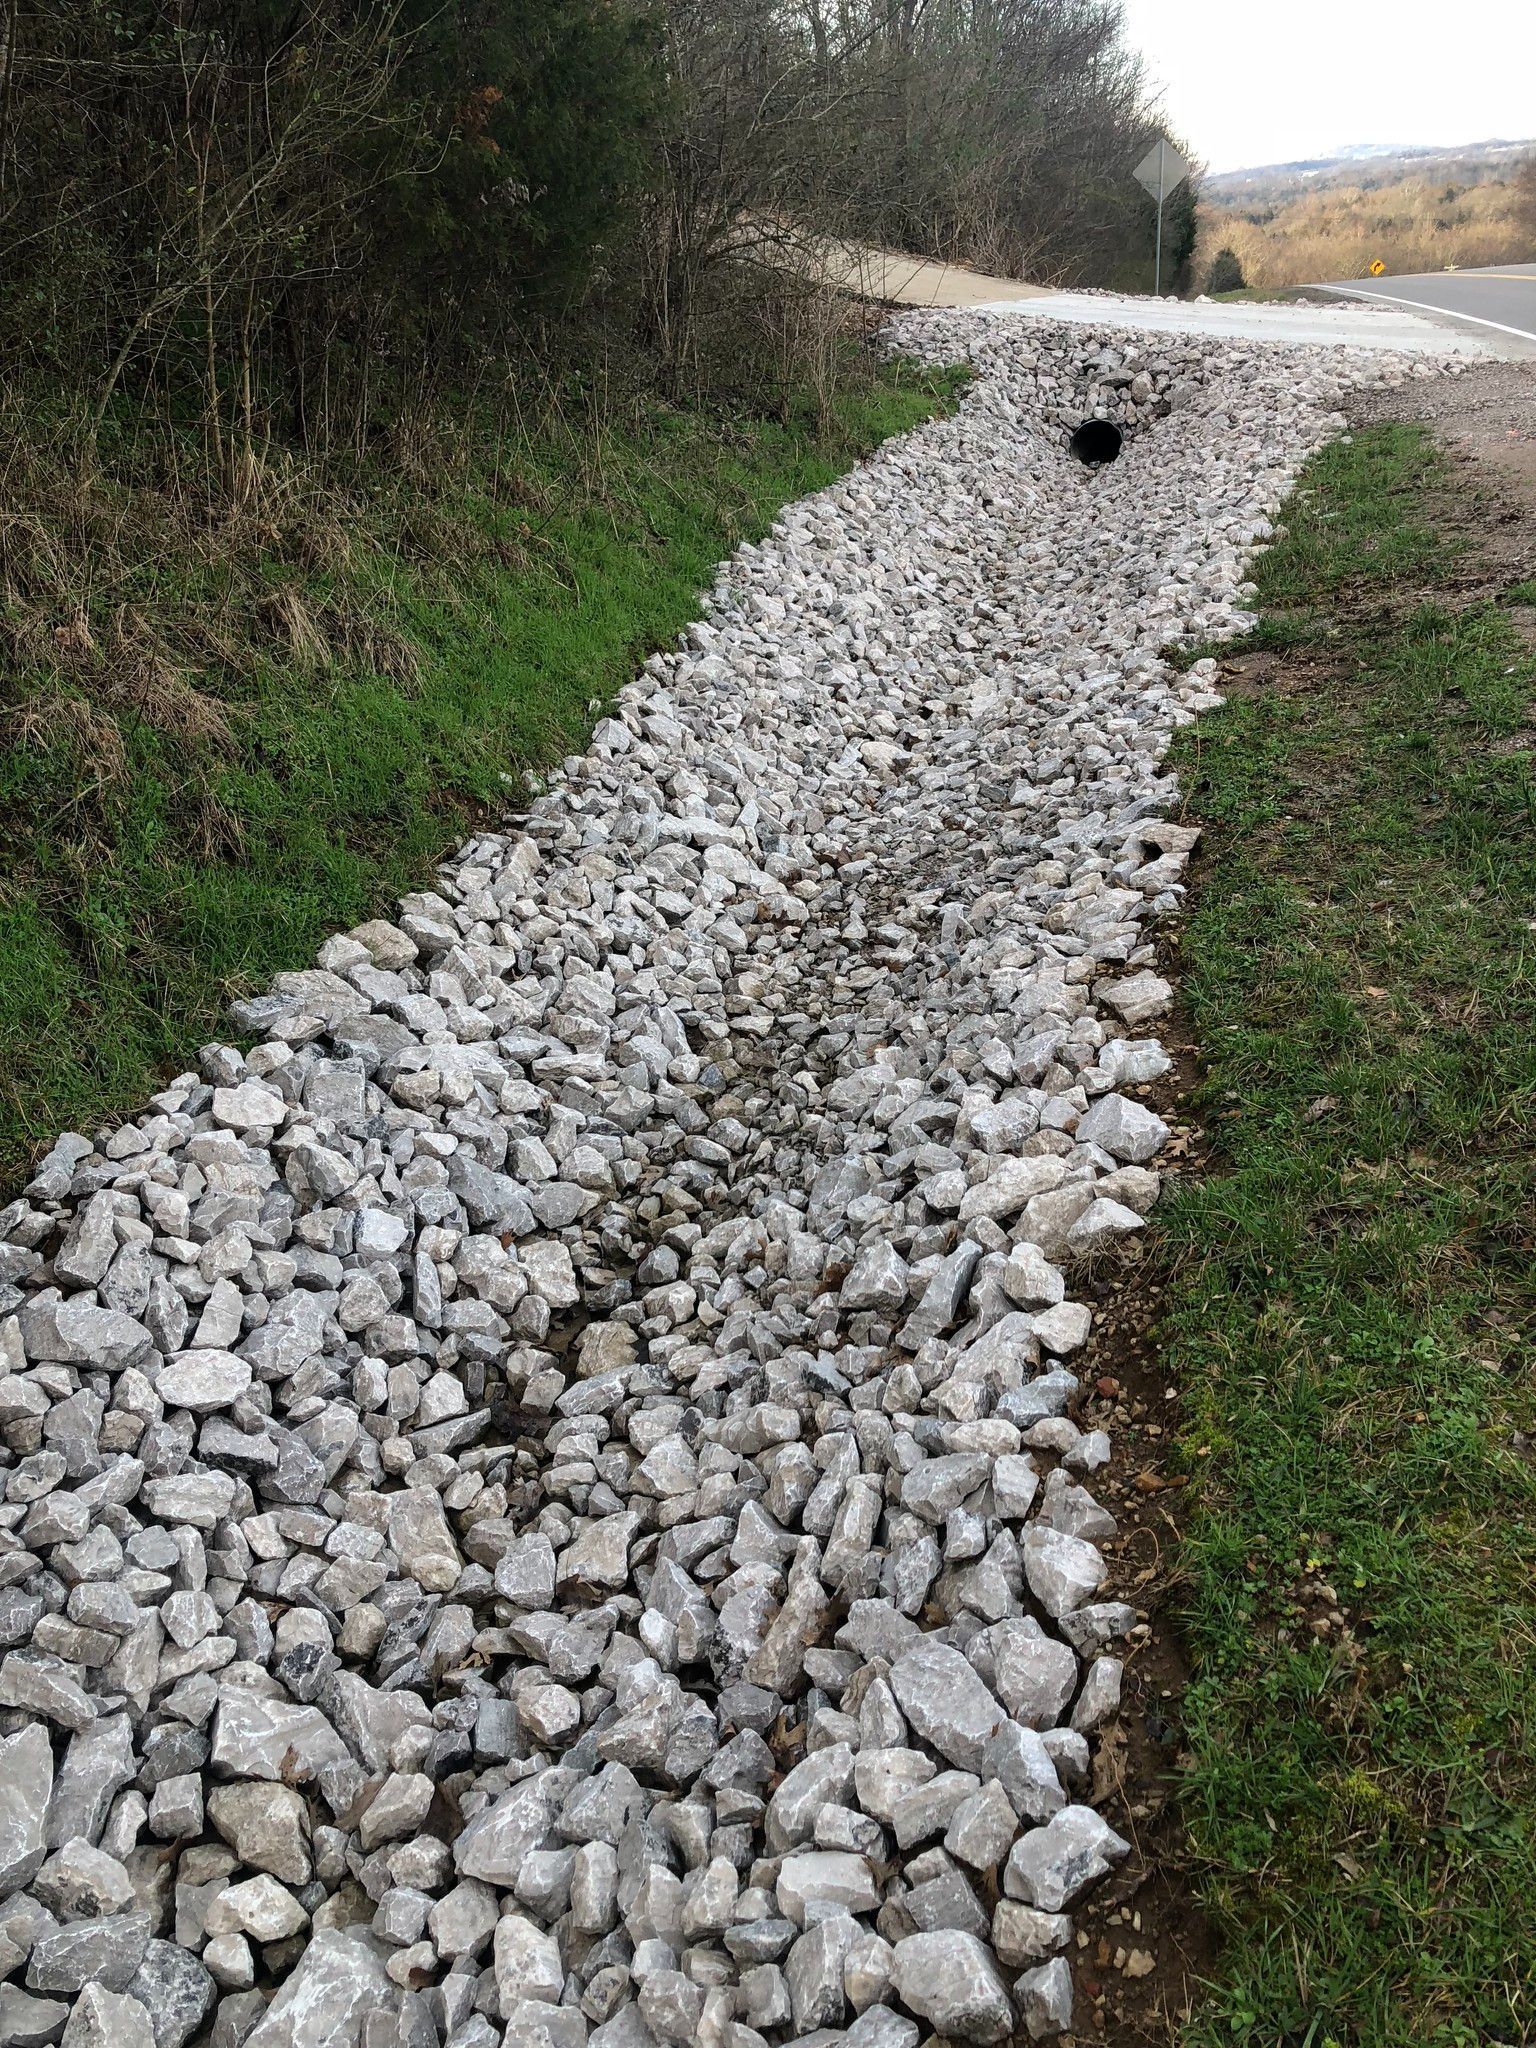 A gravel path going through a grassy area next to a road.